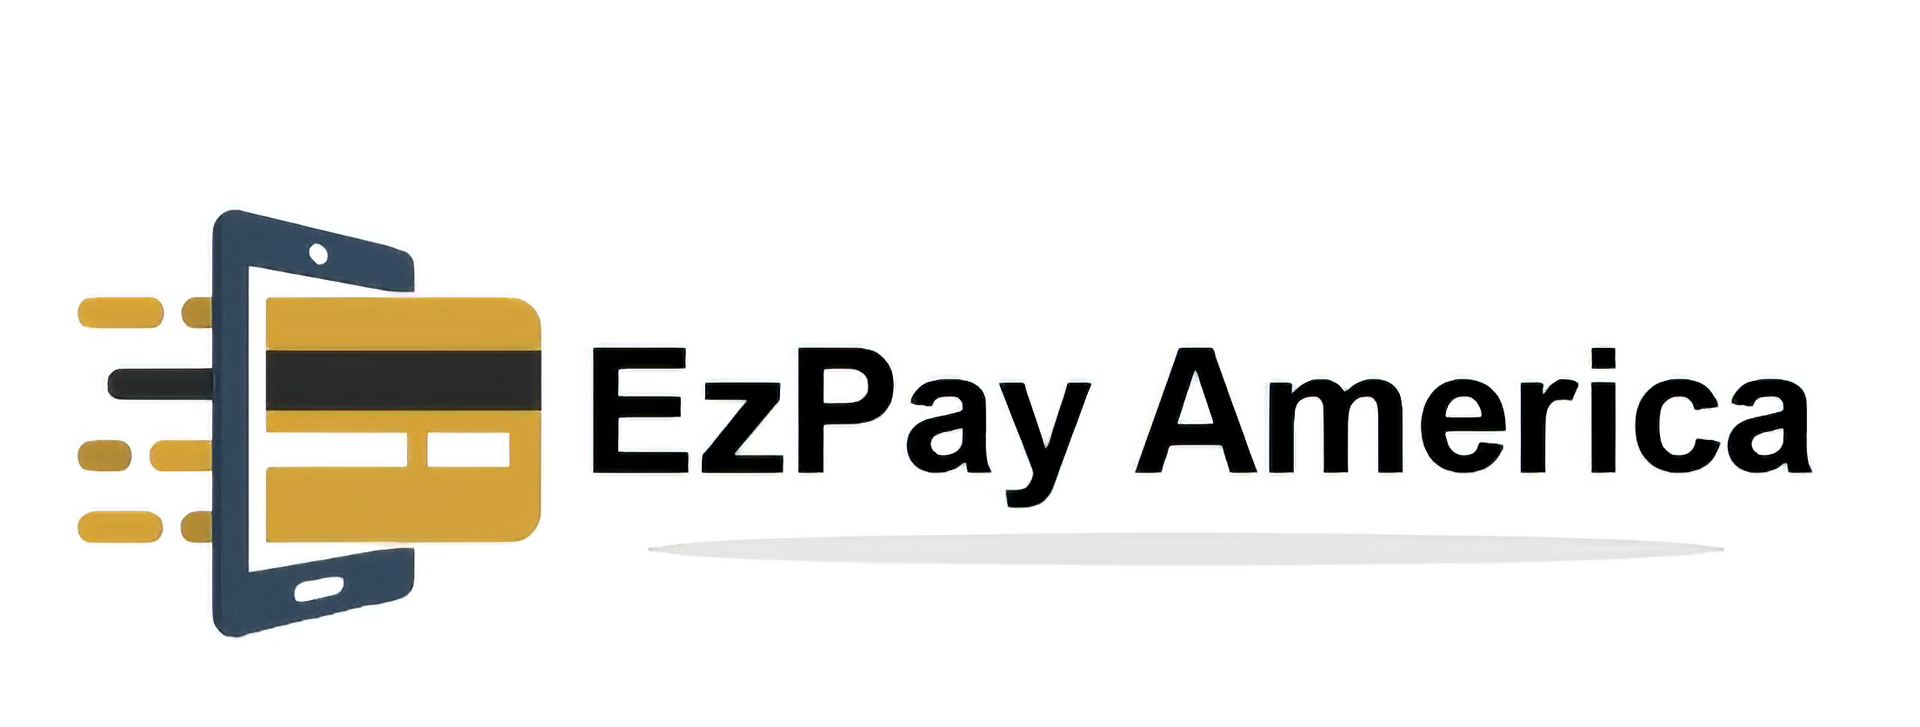 The logo for ezpay america shows a cell phone and a credit card.